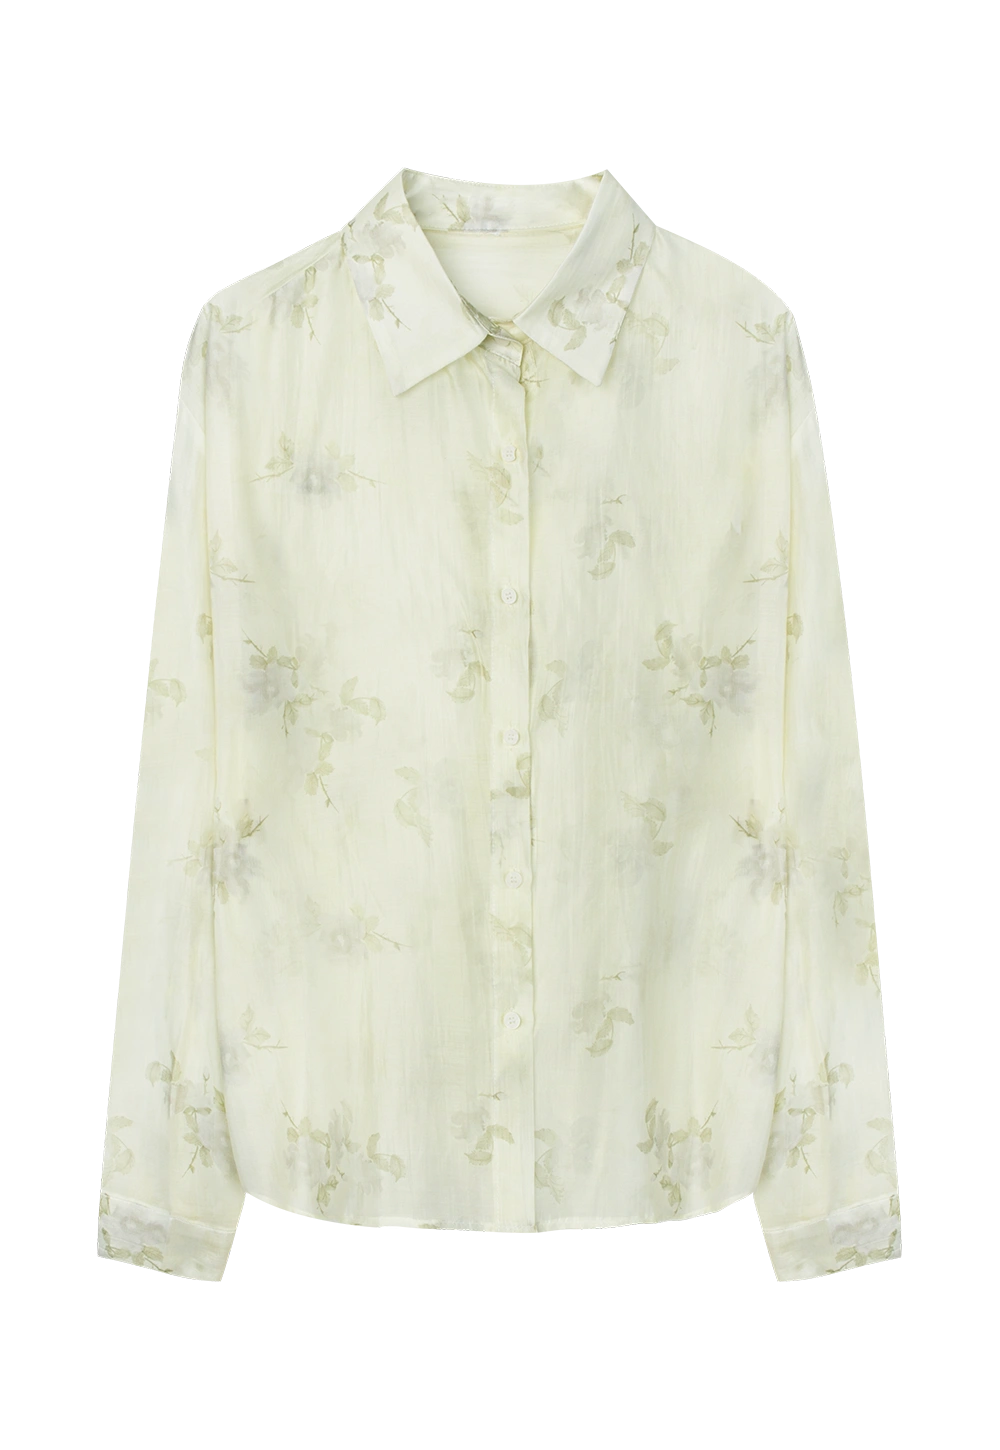 Women's Floral Print Lightweight Sheer Blouse with Classic Collar